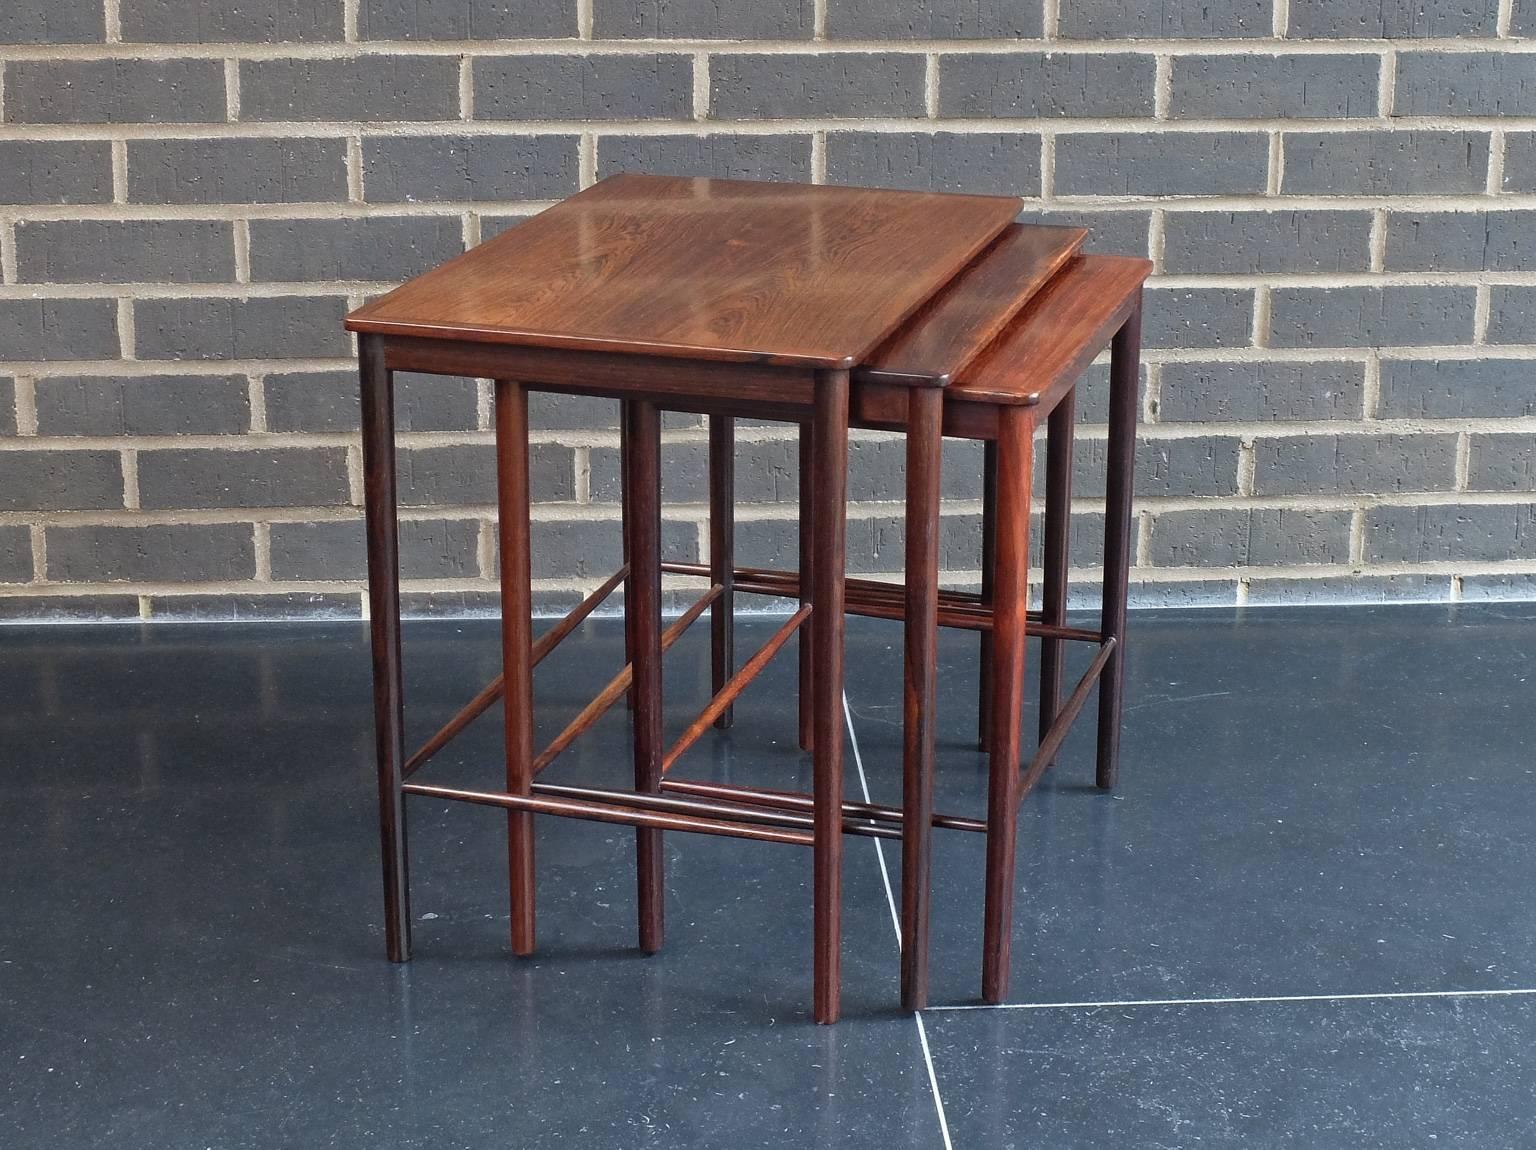 Scandinavian Modern Danish 1960s Rosewood Nest of Tables by Kai Winding for Poul Jepessen